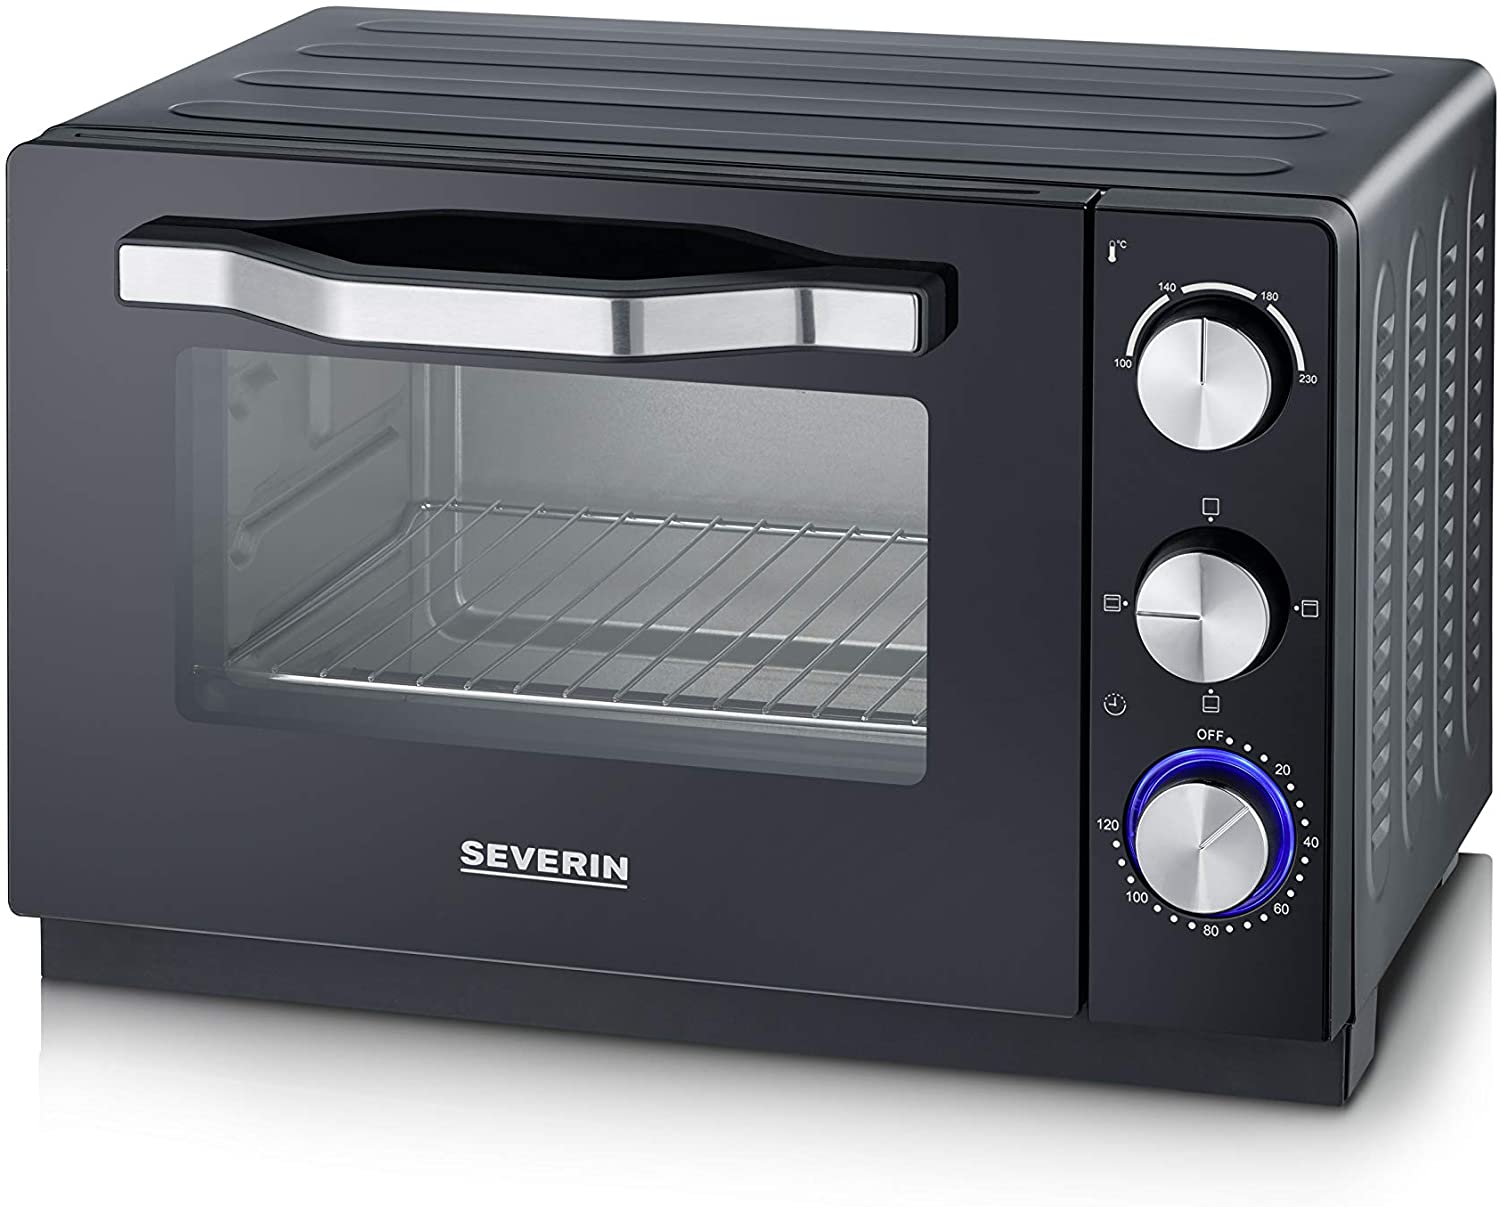 Severin Toast Oven TO 2070, Metal, 1380 W, 20 Litres, Black